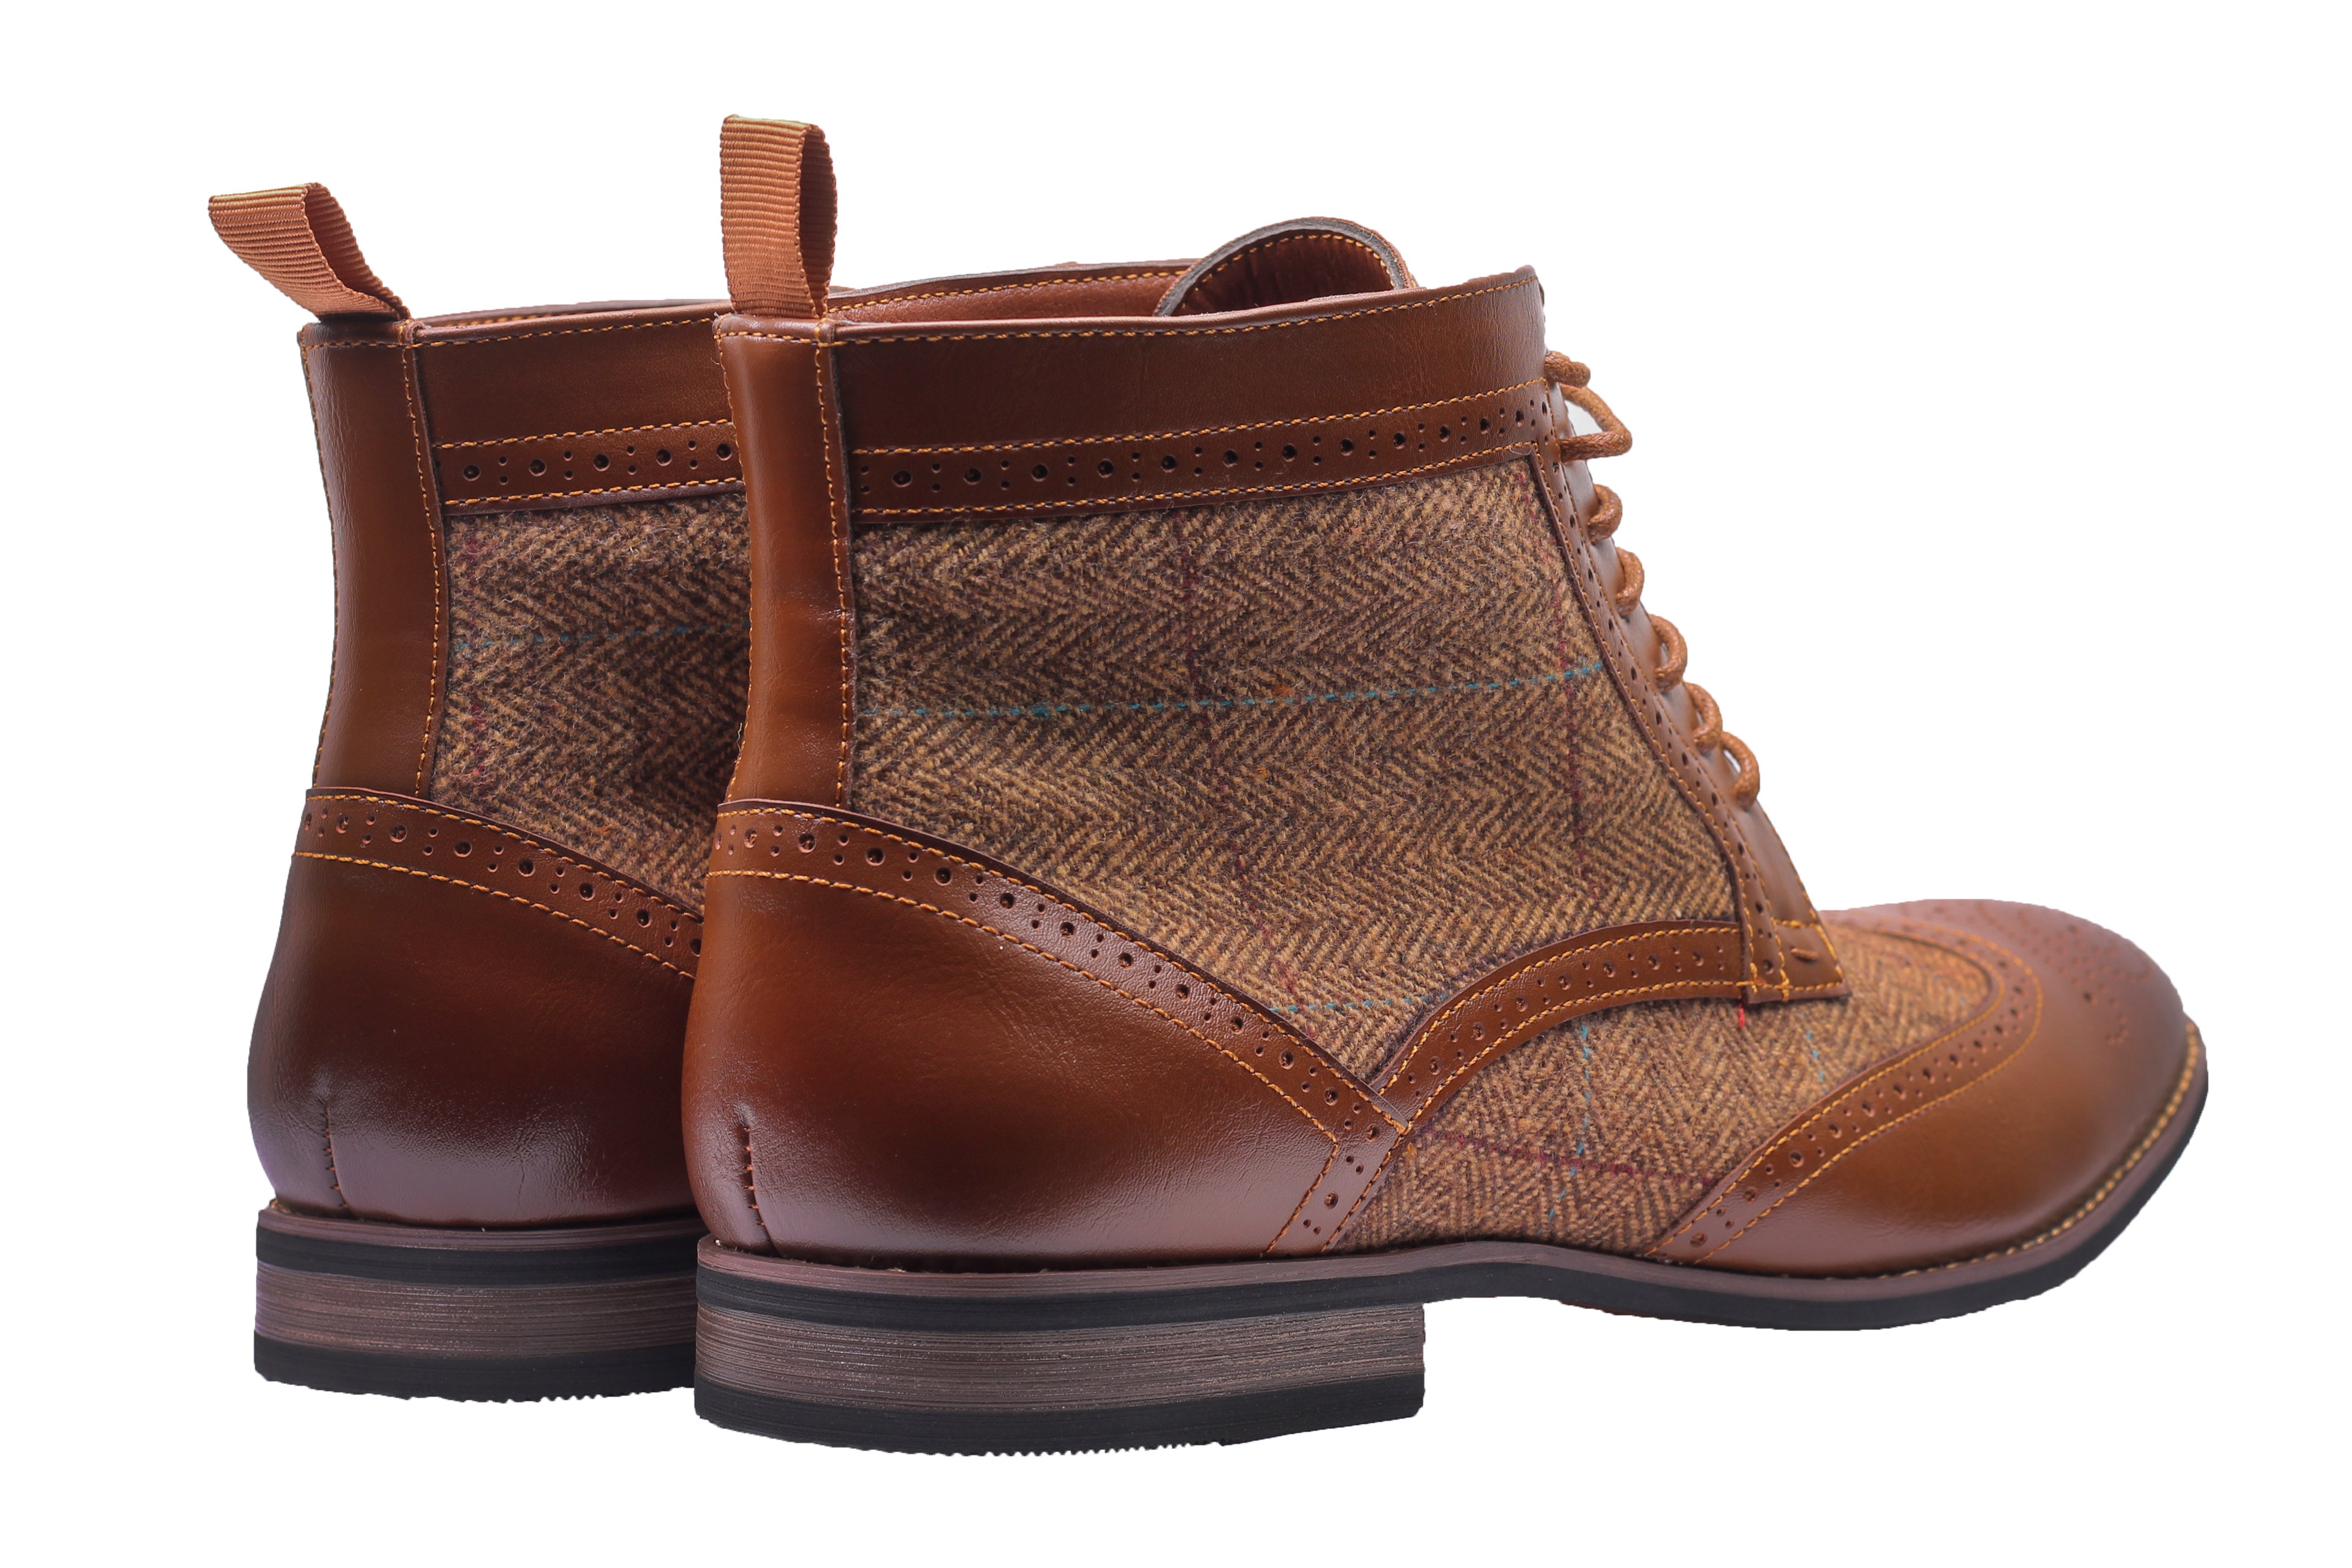 TWEED BROGUE BOOTS LACE UP